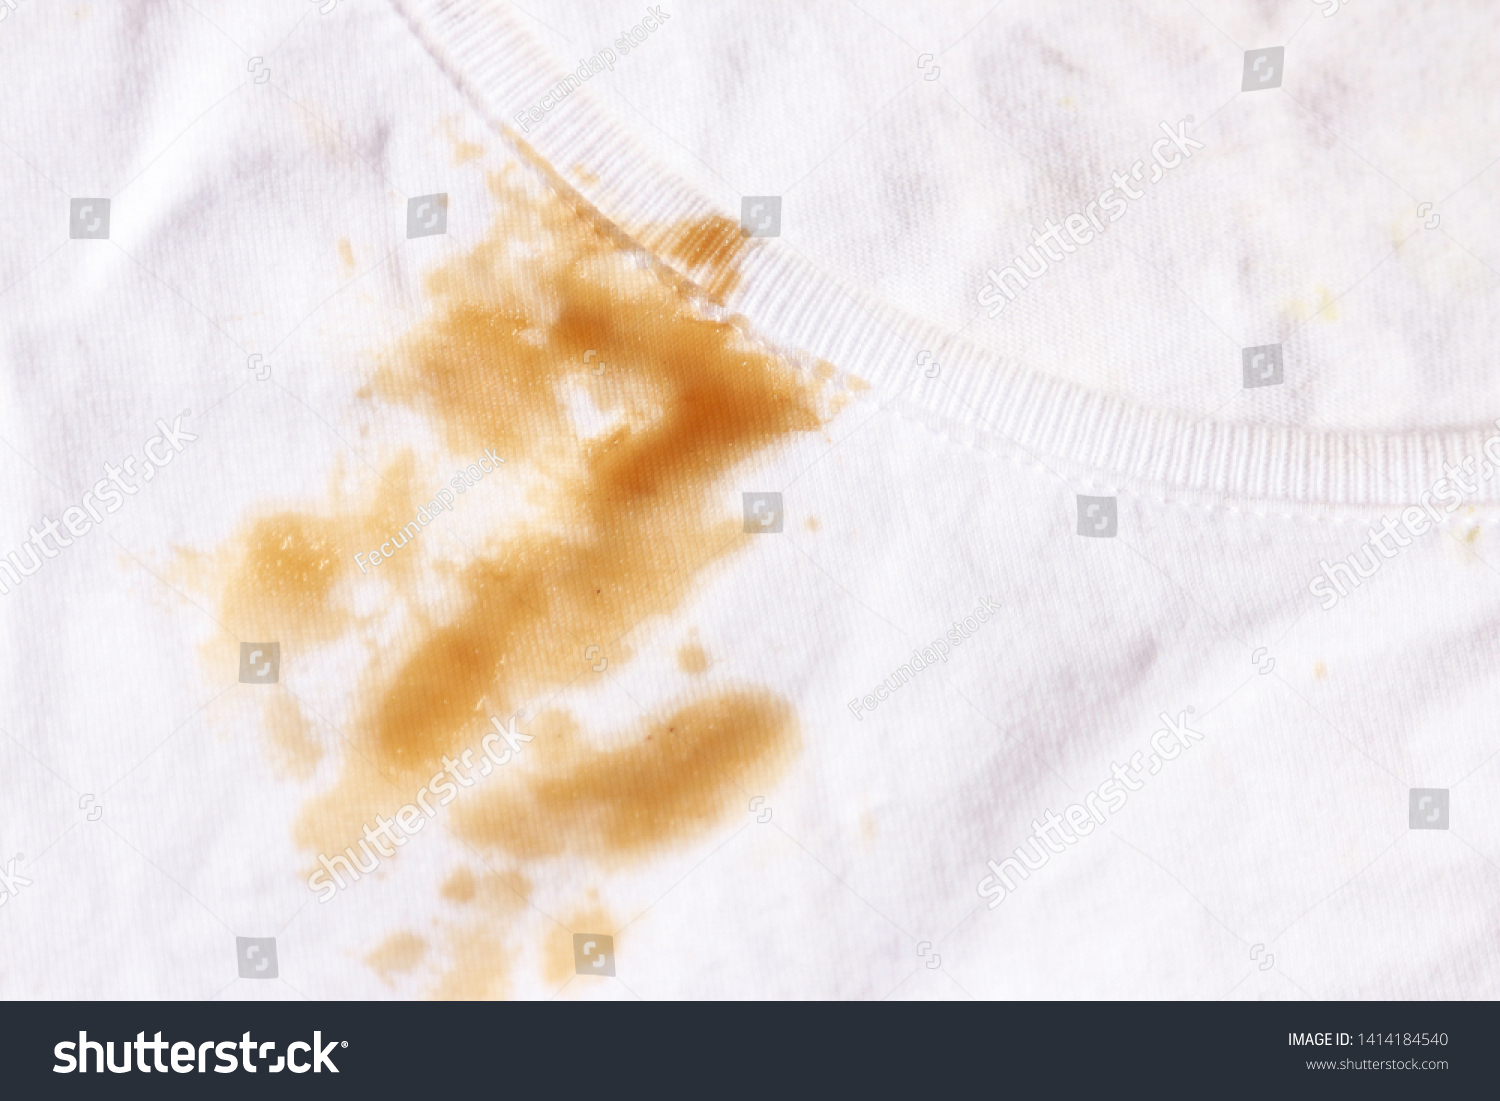 Dirty sauce stain on fabric from accident in daily life. dirt stains for cleaning work house  #1414184540